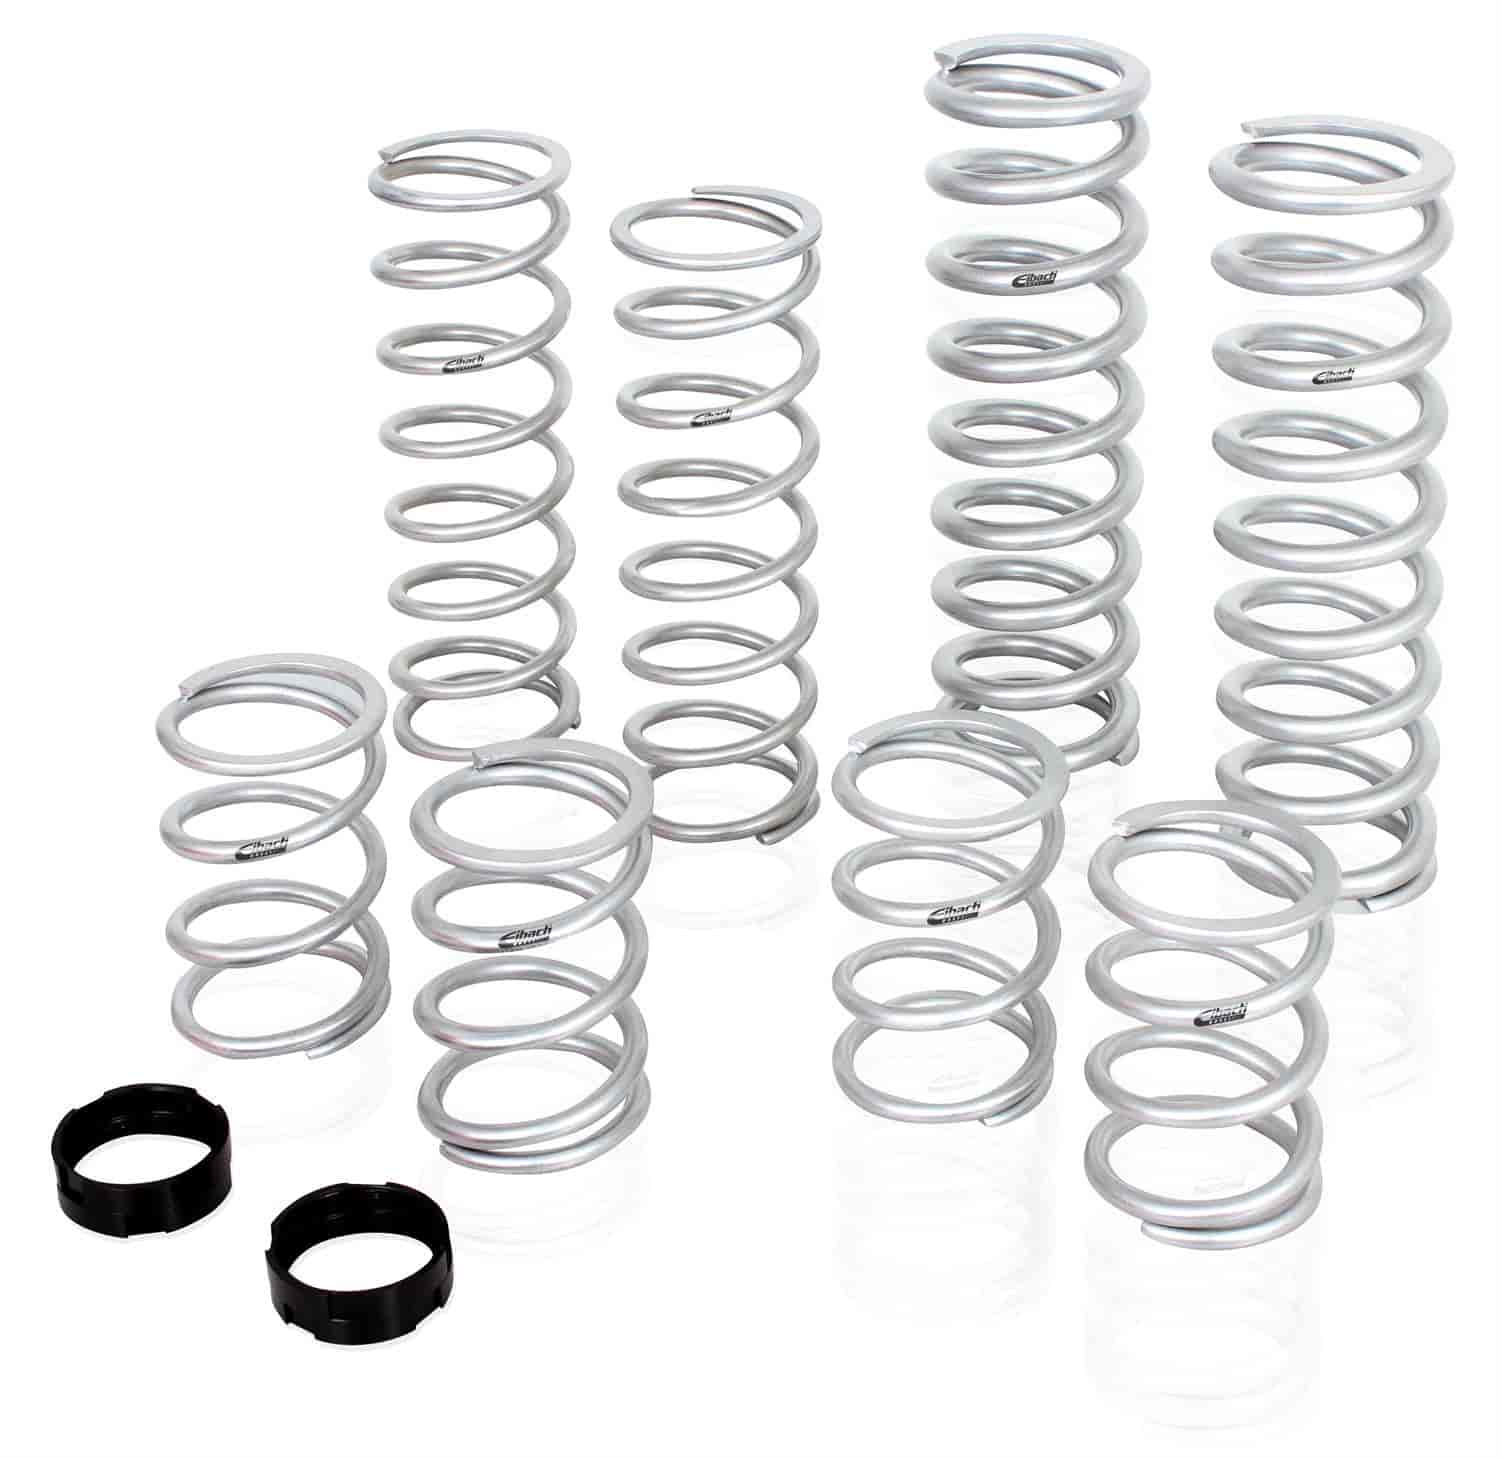 E85-212-003-03-22 Spring Kit Can-am Maverick Turbo 1000cc 2015 to 2016 2 Seater Stage 3 EXTRA LOAD kit for Fox OE Shoc